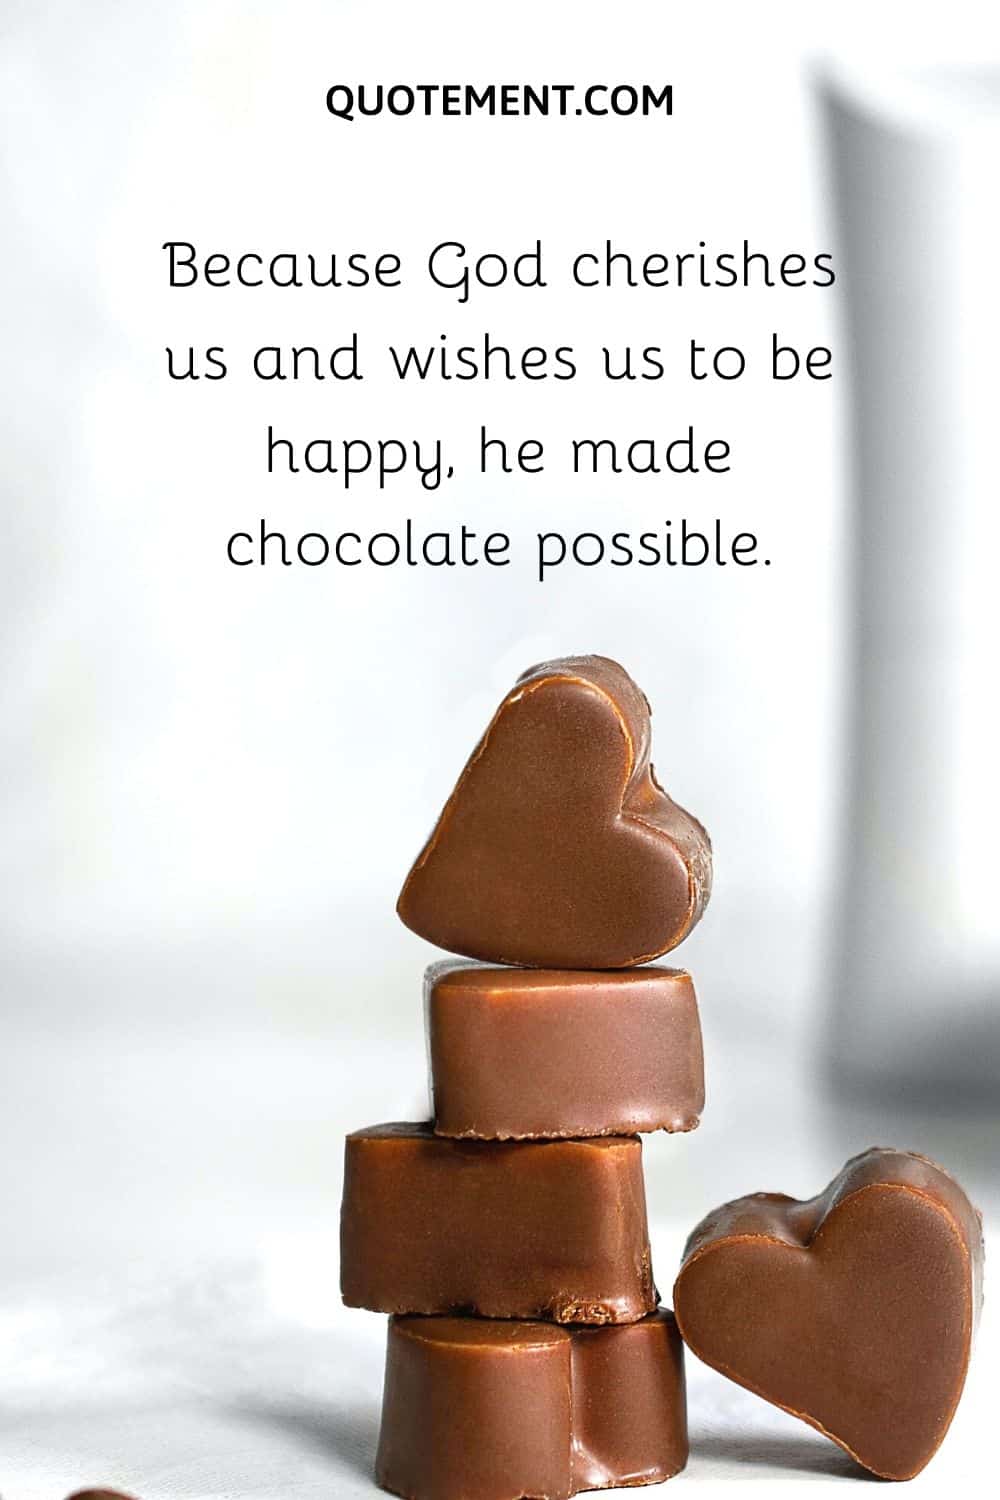 Because God cherishes us and wishes us to be happy, he made chocolate possible.